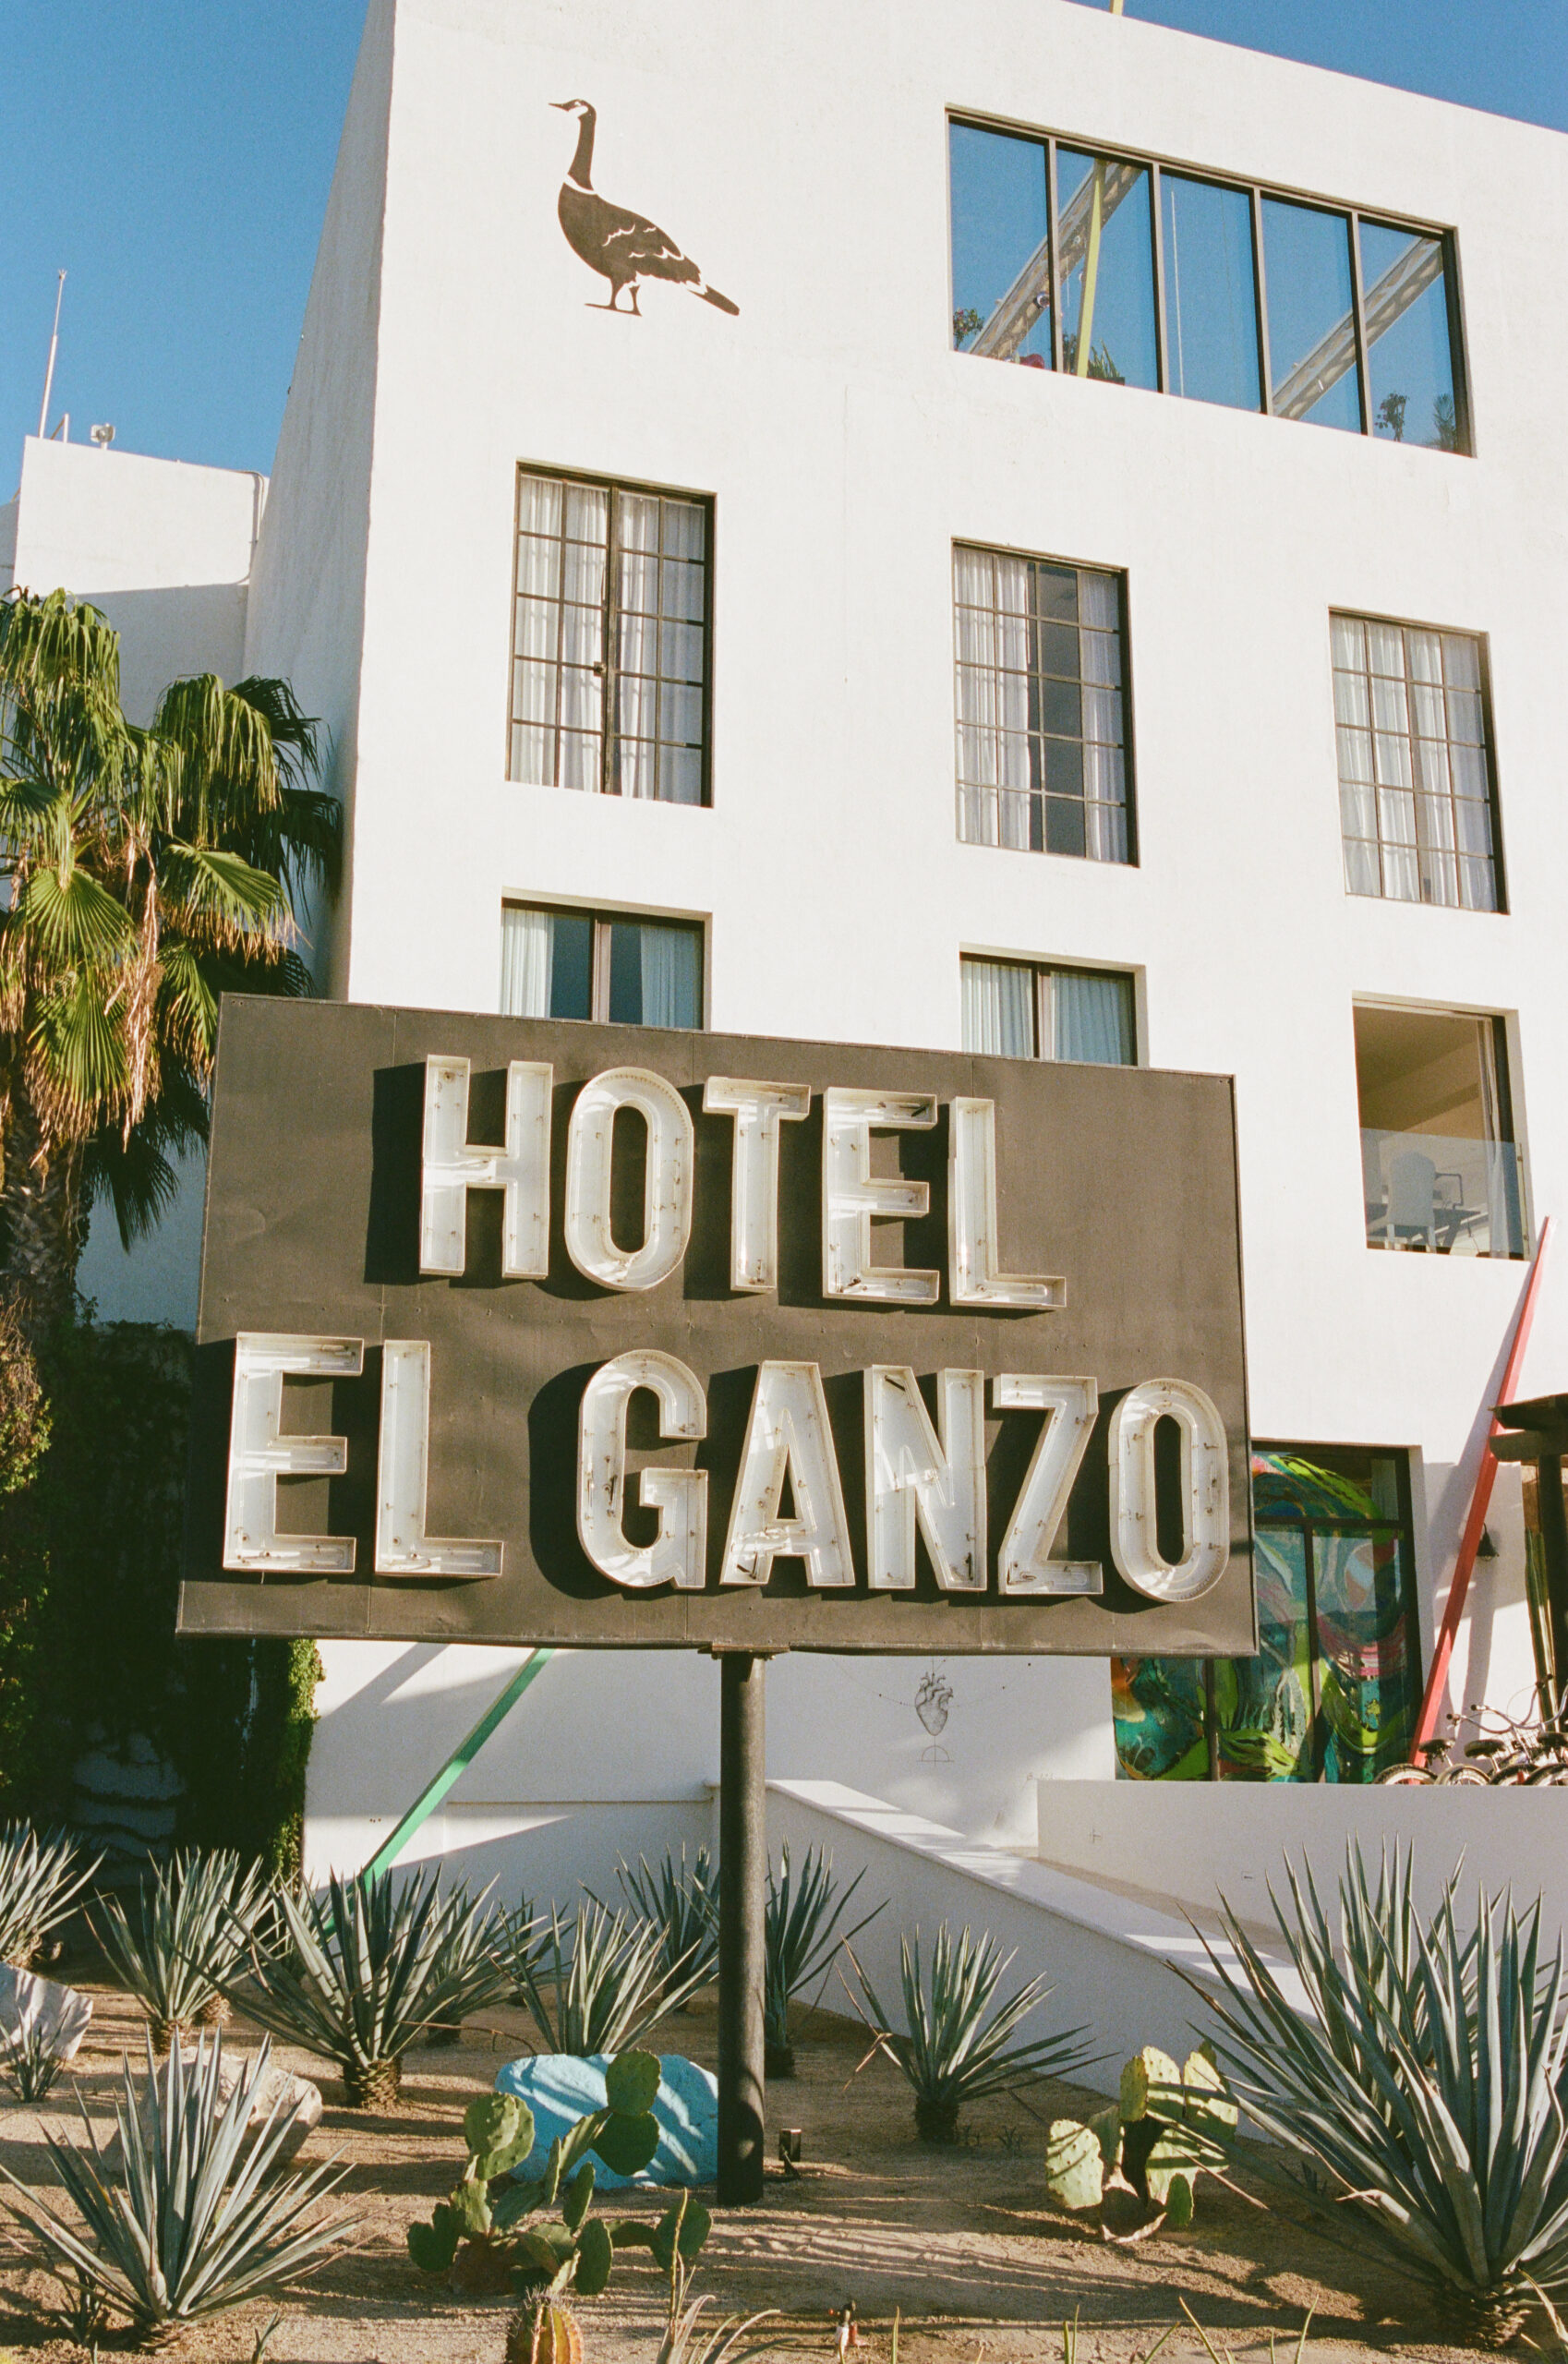 Hotel El Ganzo sign. Beautiful tall white Mexican modern architecture. Desert landscaping. Mexico wedding